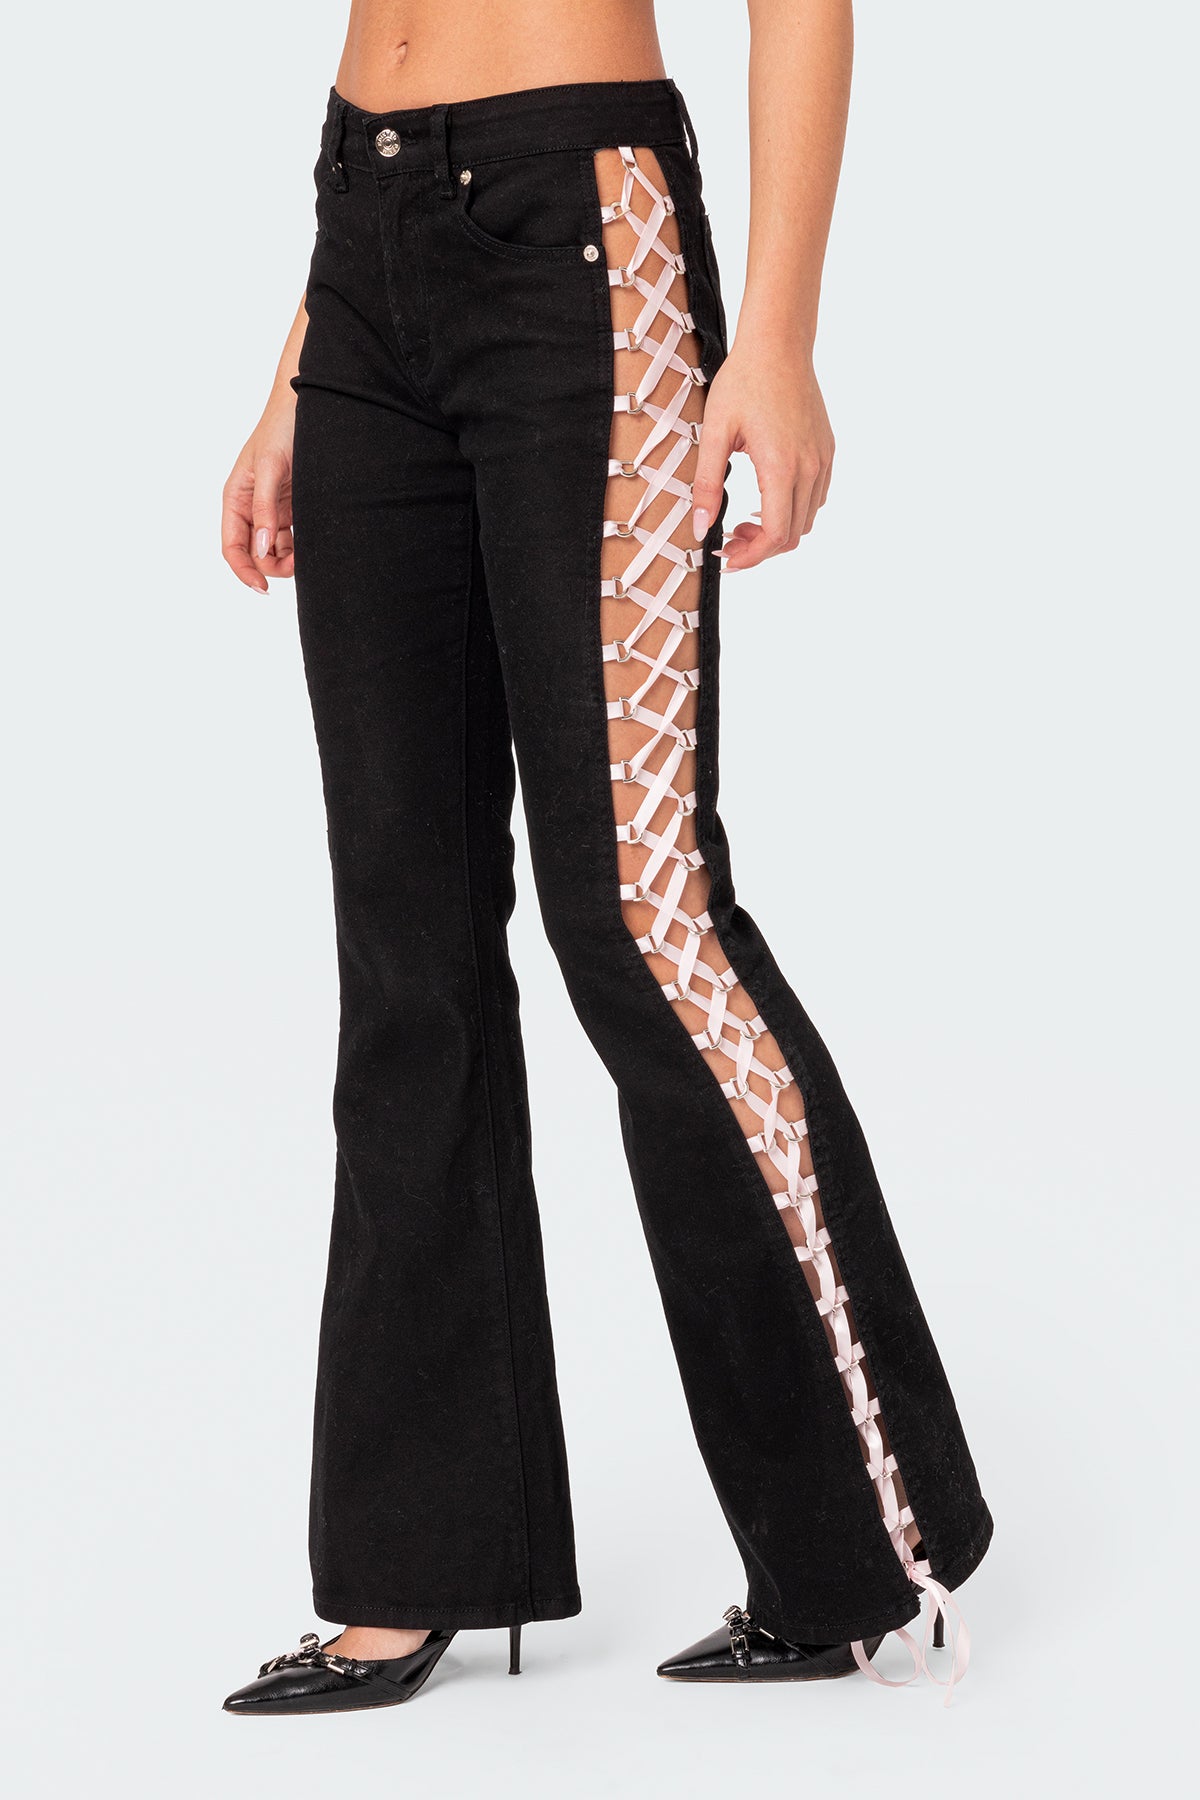 Satin Lace Up Flared Jeans